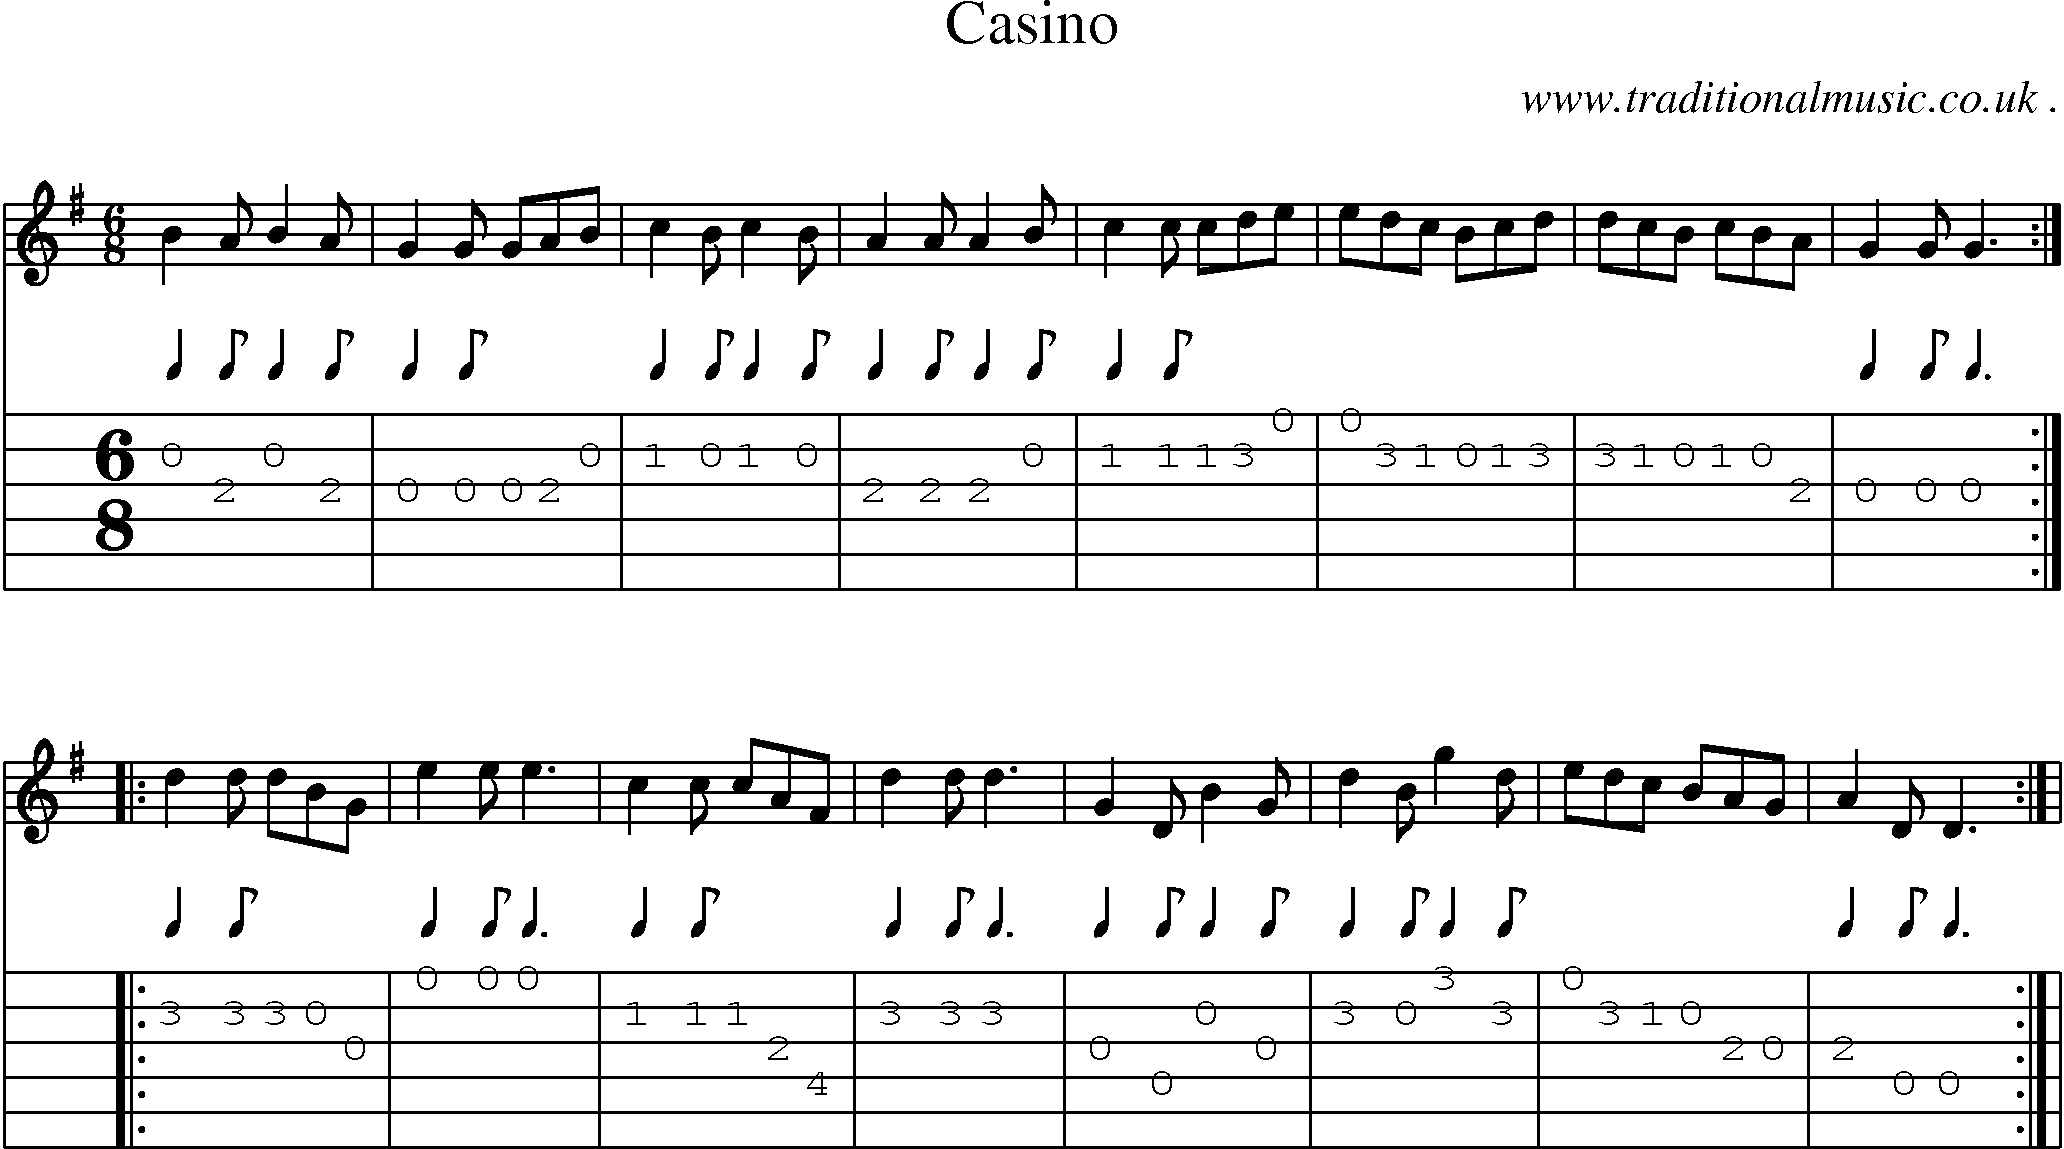 Sheet-Music and Guitar Tabs for Casino